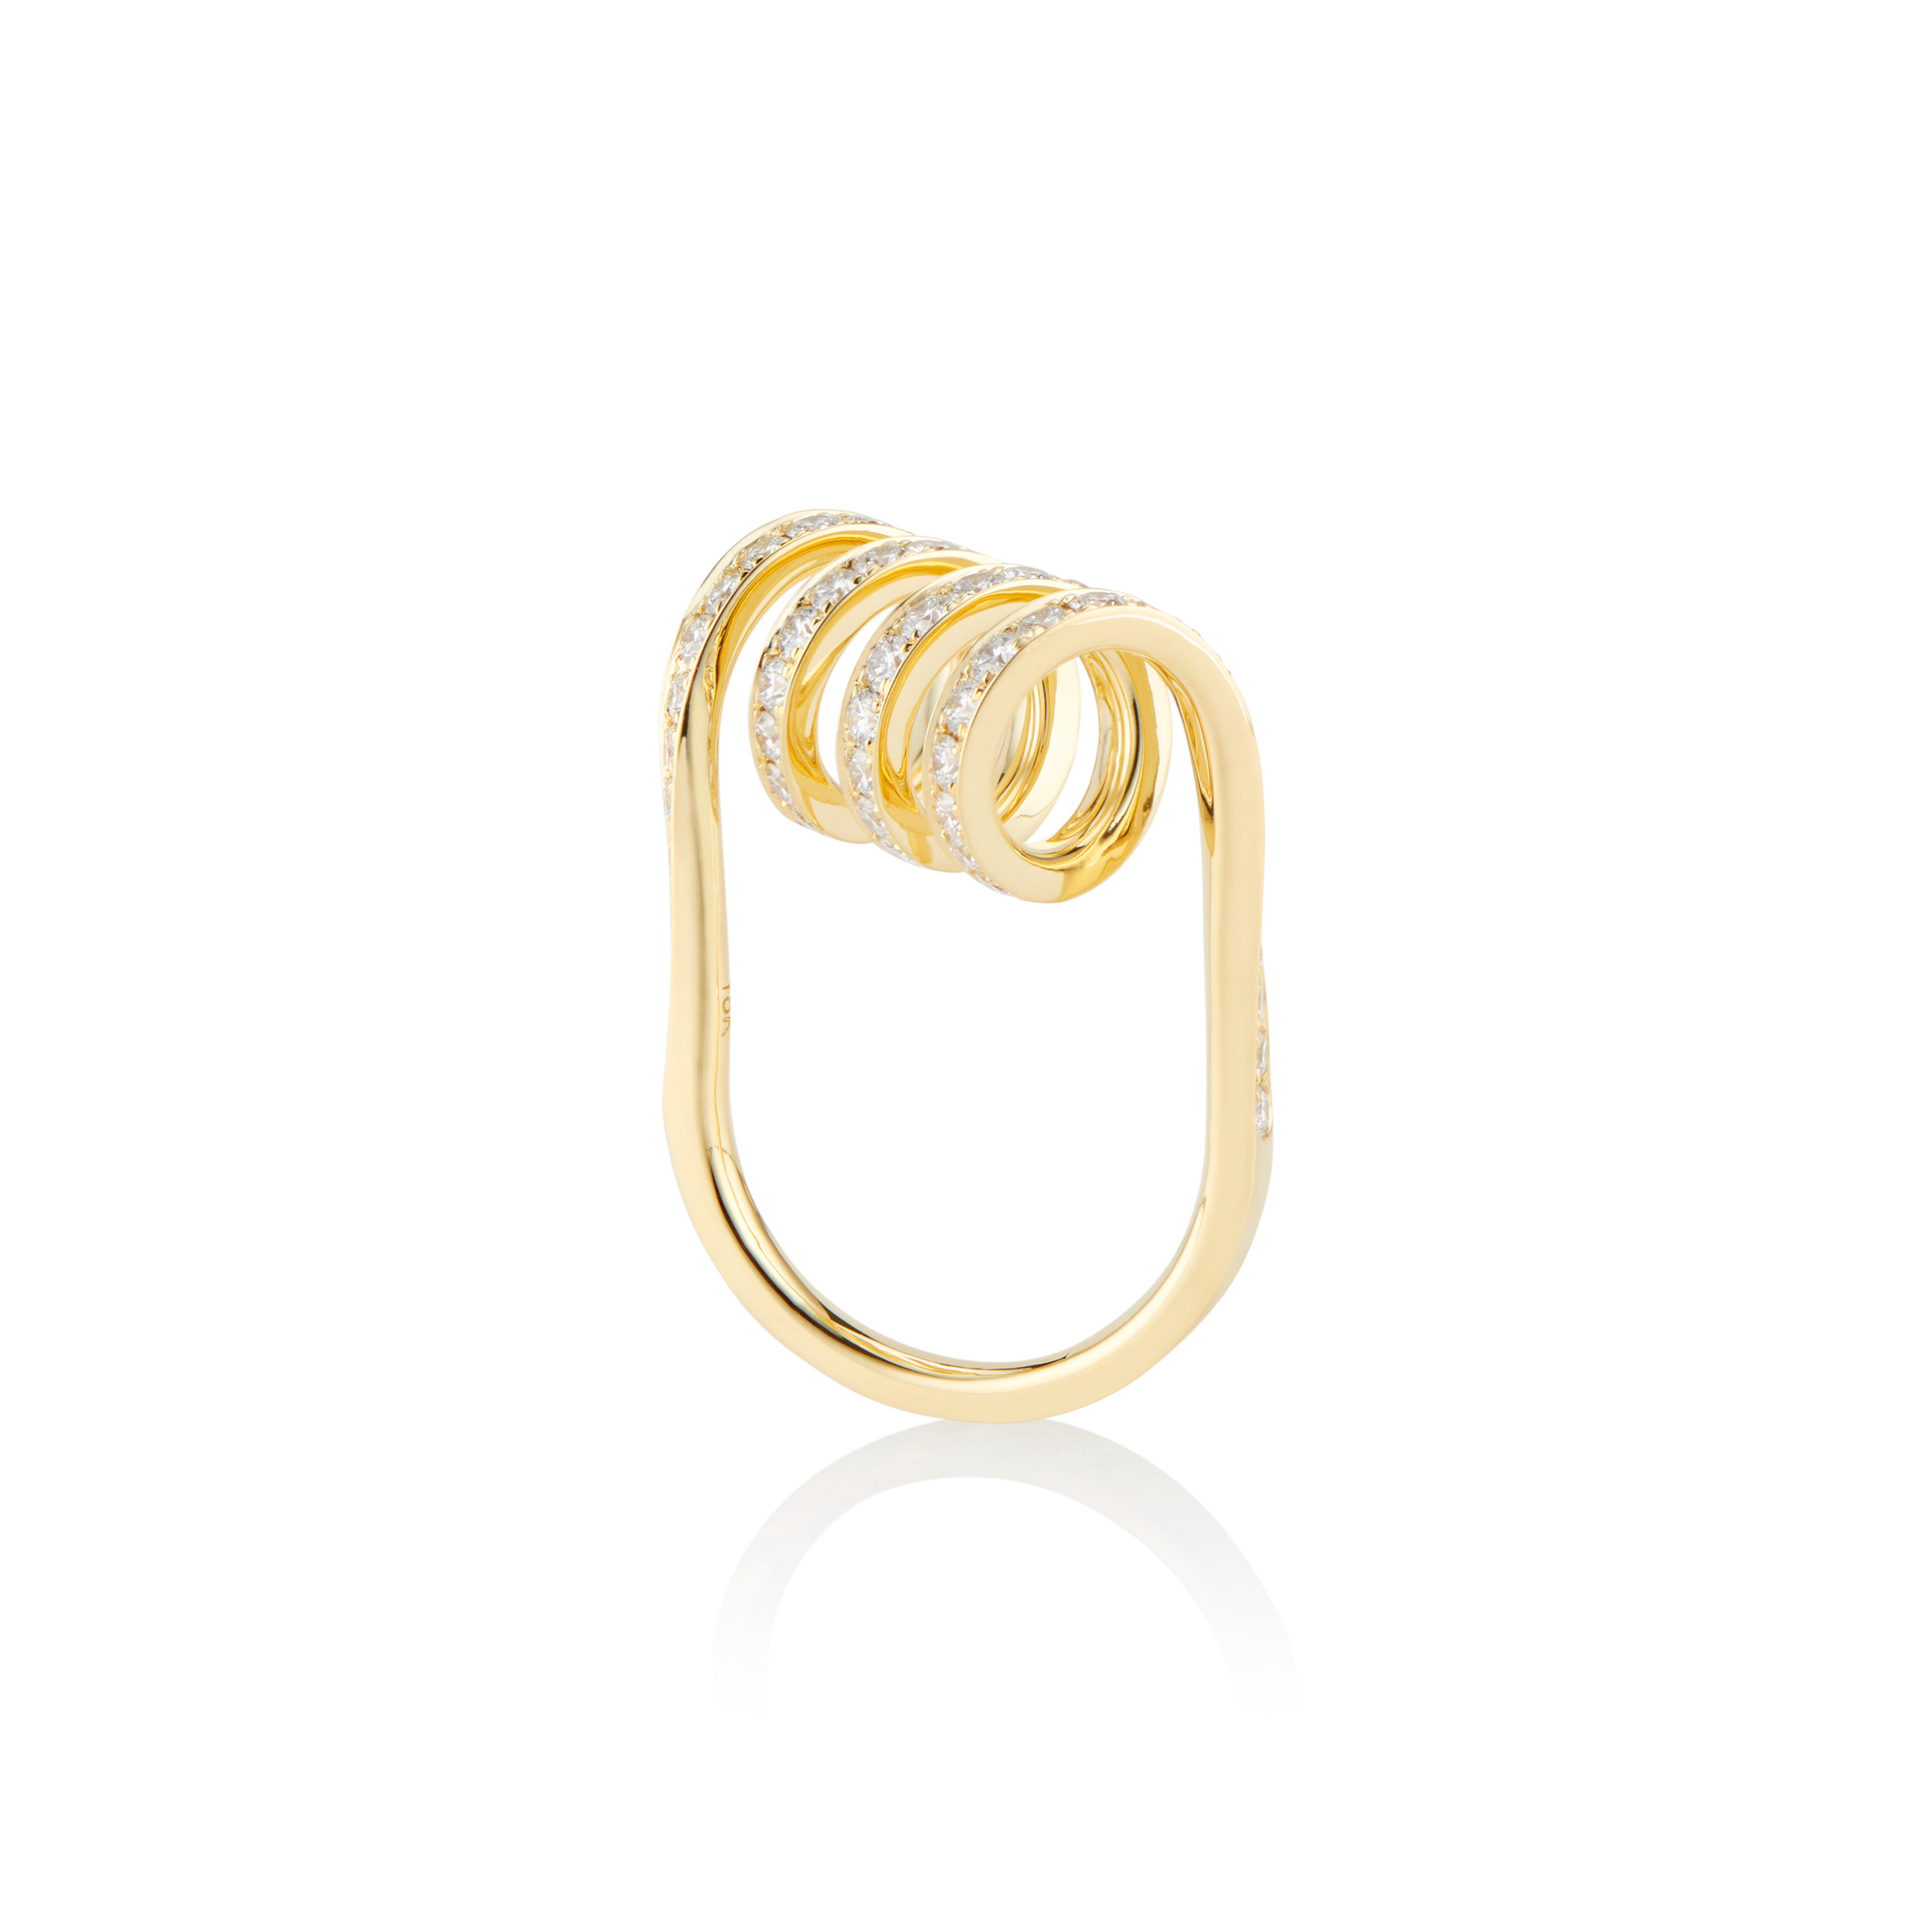 This is a photo 3/4 view of the Pave Curl Ring designed by Sardwell for Renisis. It features a unique spiral design in 18k yellow gold and pave‘ diamonds.